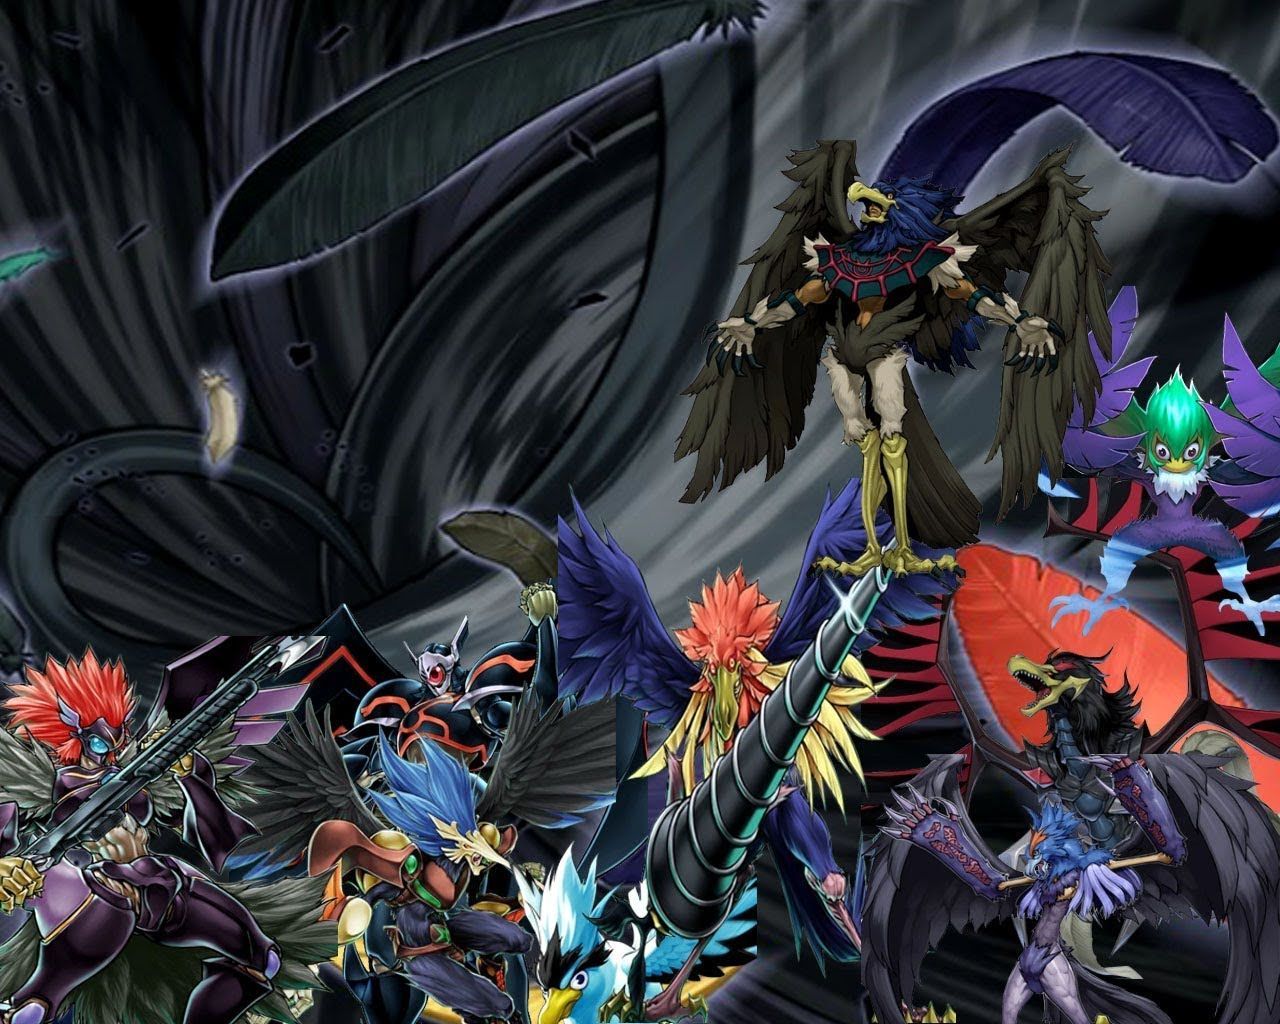 He Runs The Blackwings And Here They Are. Description From Neosforce4727.com. I Searched For This On Bing.com Image. Yugioh, Card Art, Wallpaper